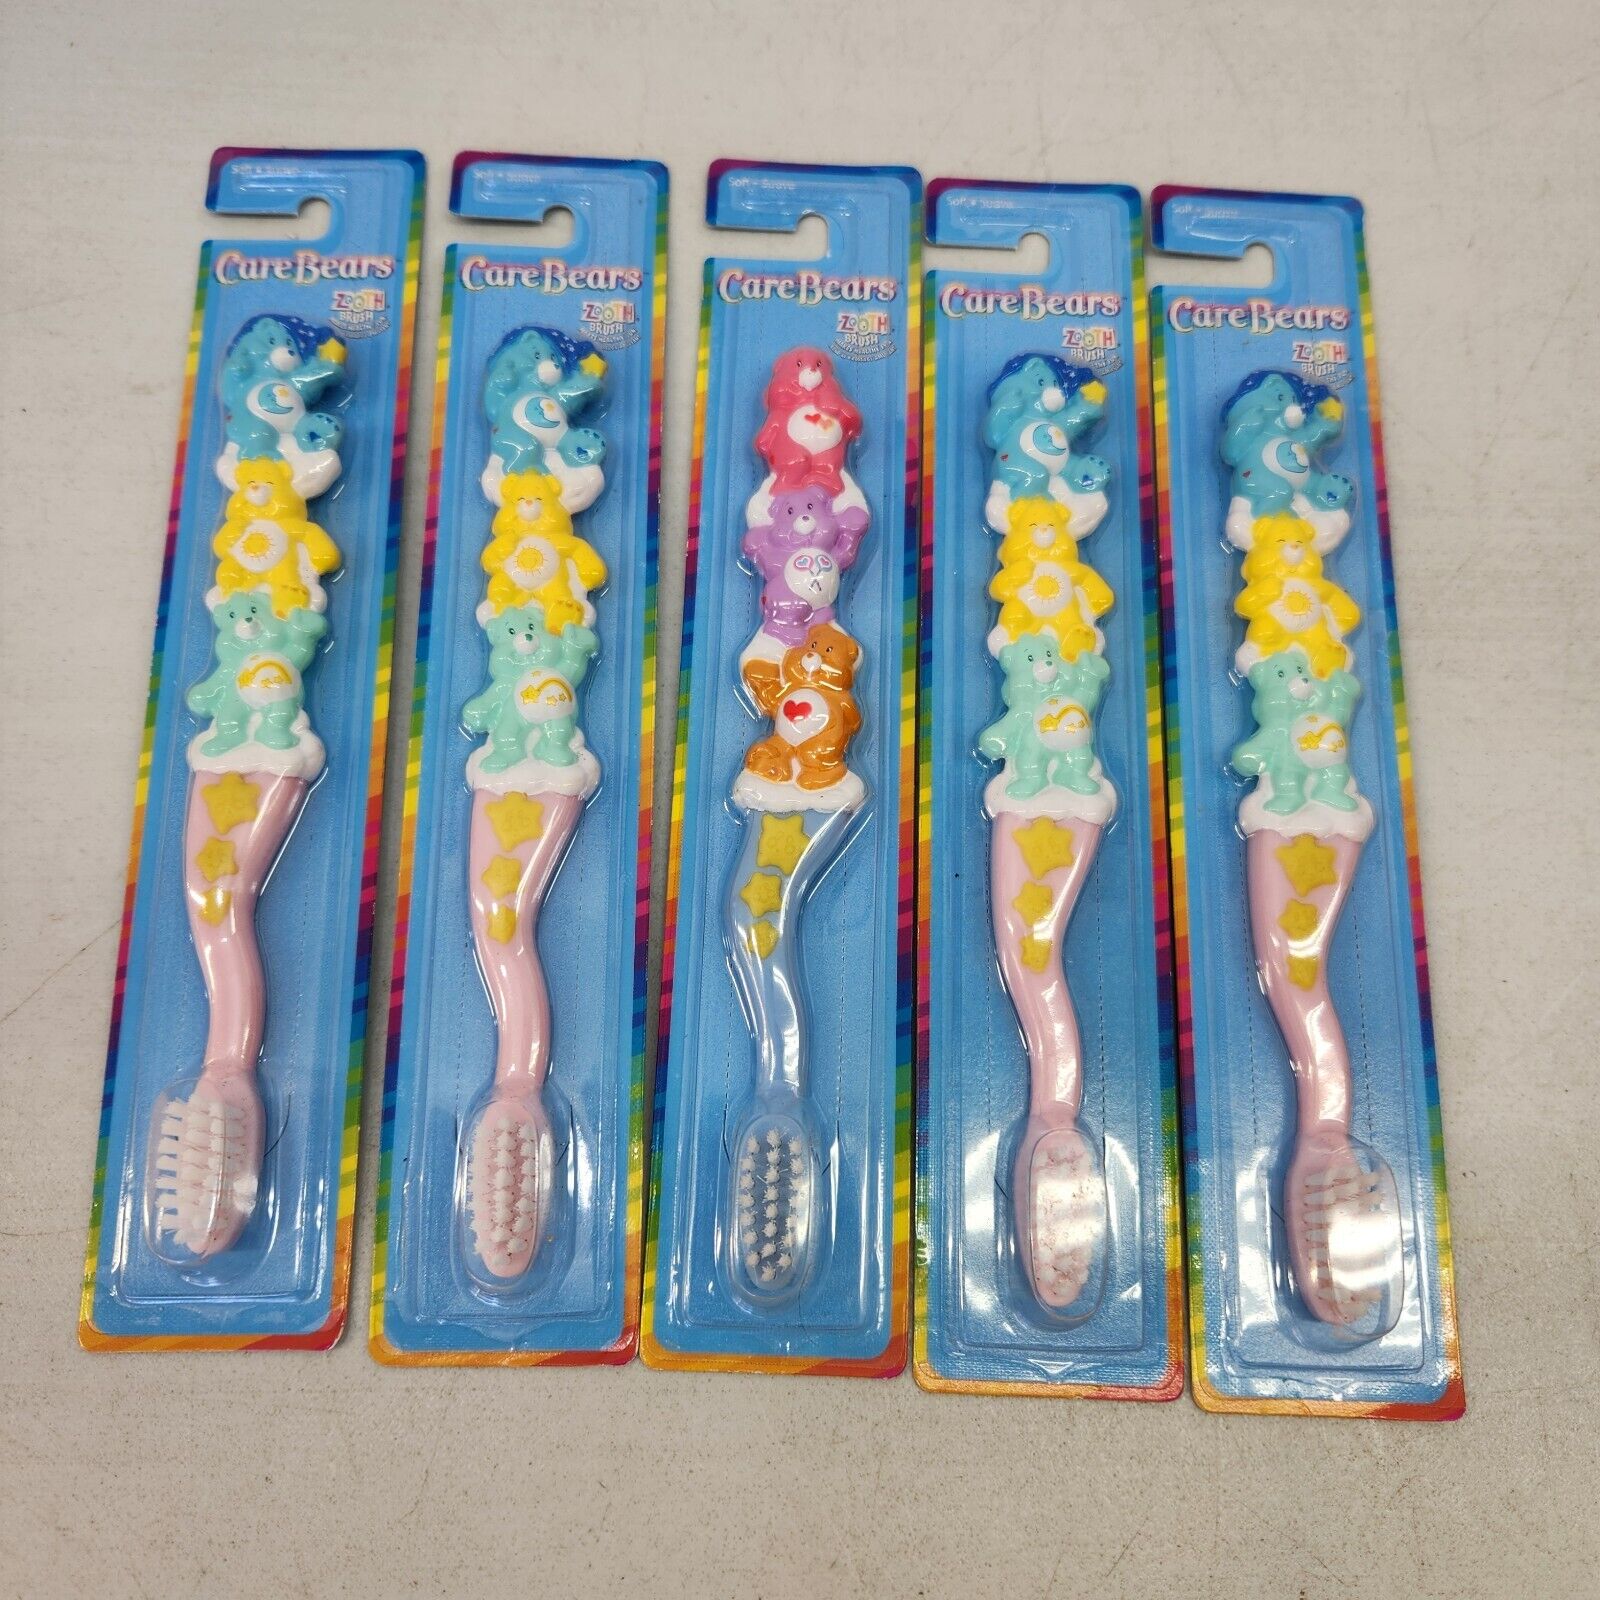 Vintage Lot Of 5 Care Bears Toothbrush Zoothbrush New In Package 2003 Pink Blue